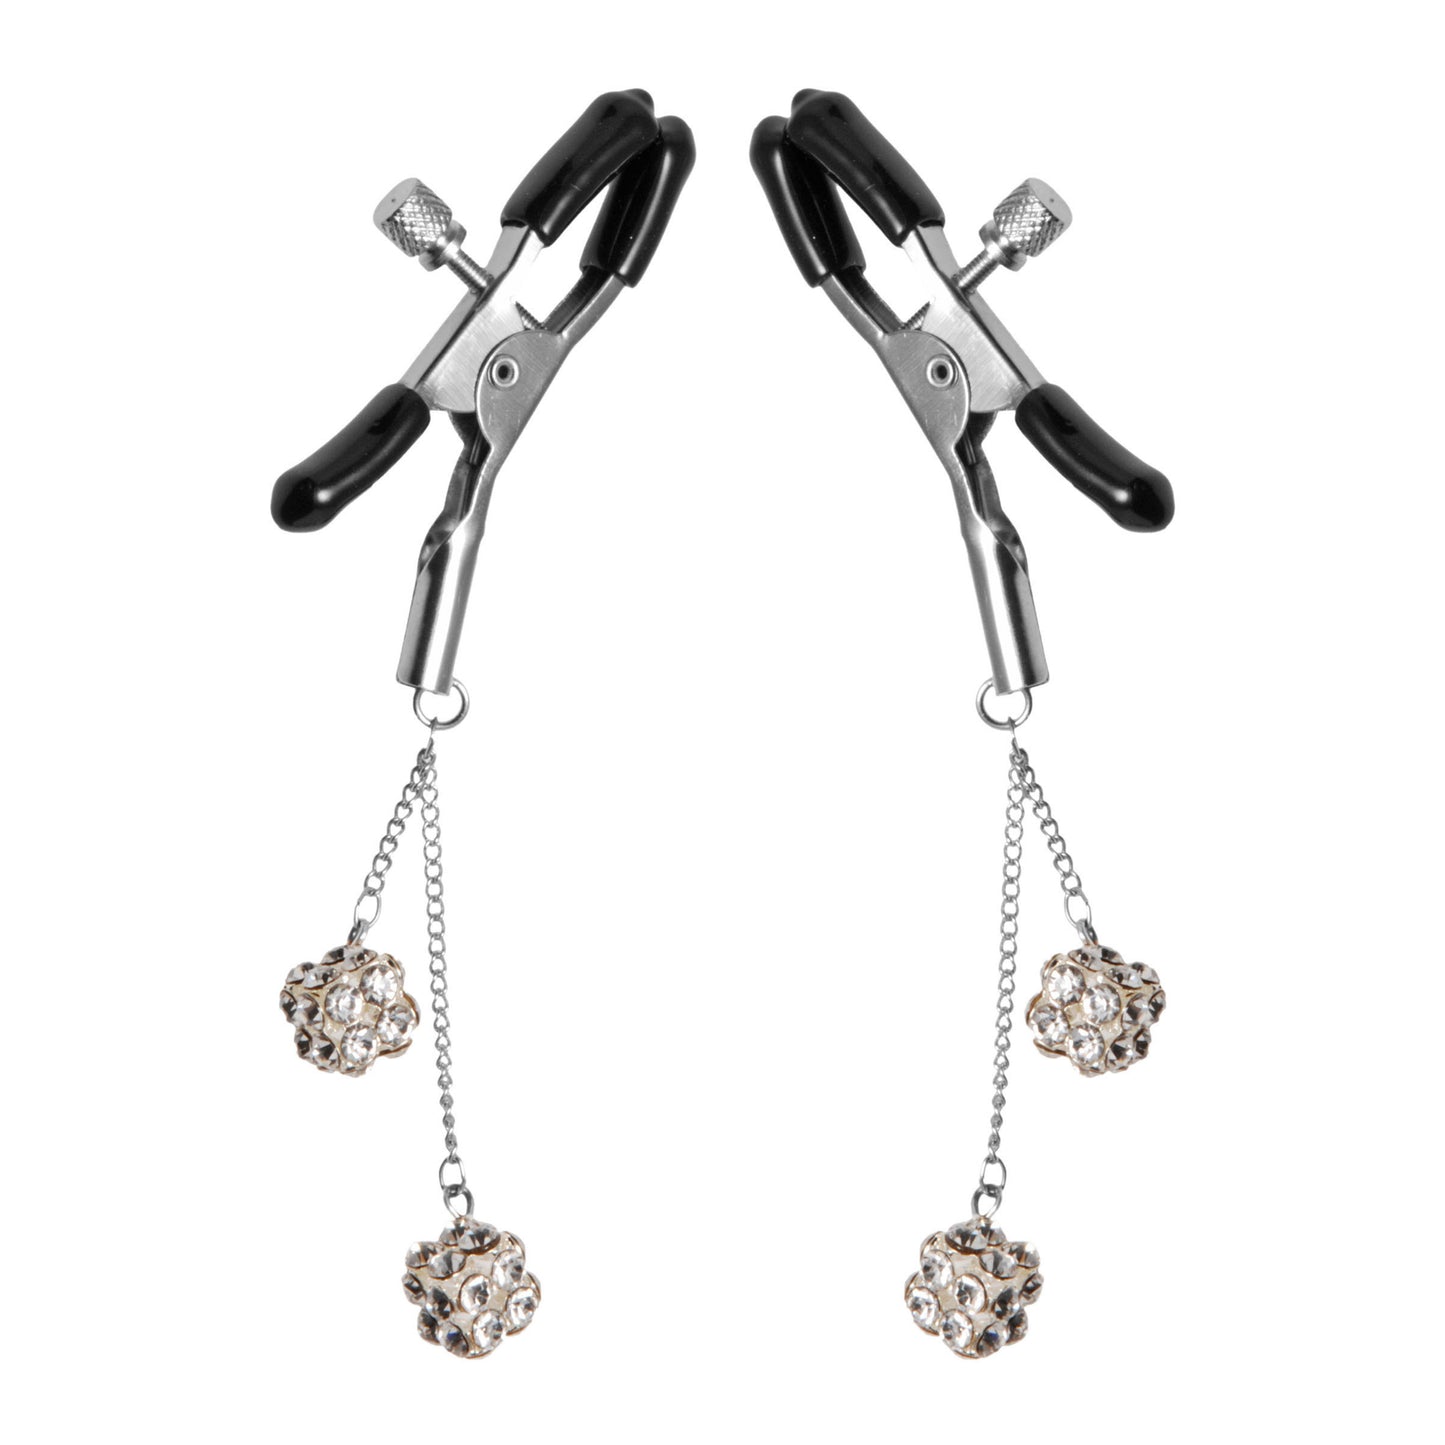 Ornament Adjustable Nipple Clamps With Jewel Accents